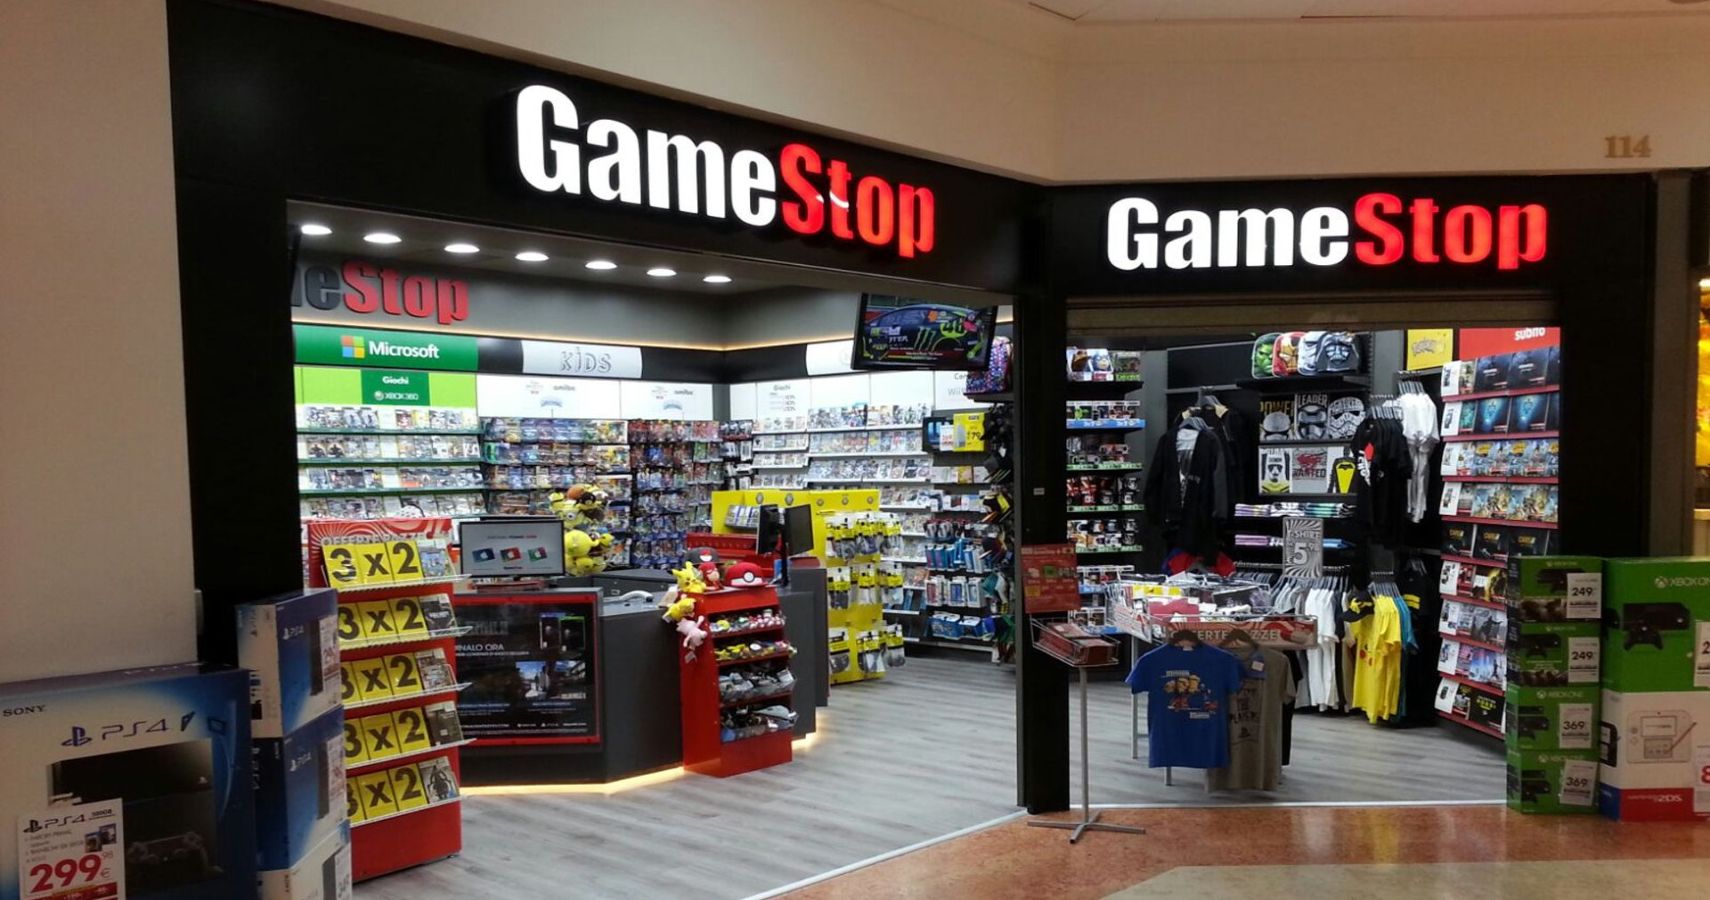 Gamestop Executive Vp Physical Games Are Still Extremely Important For Gamers